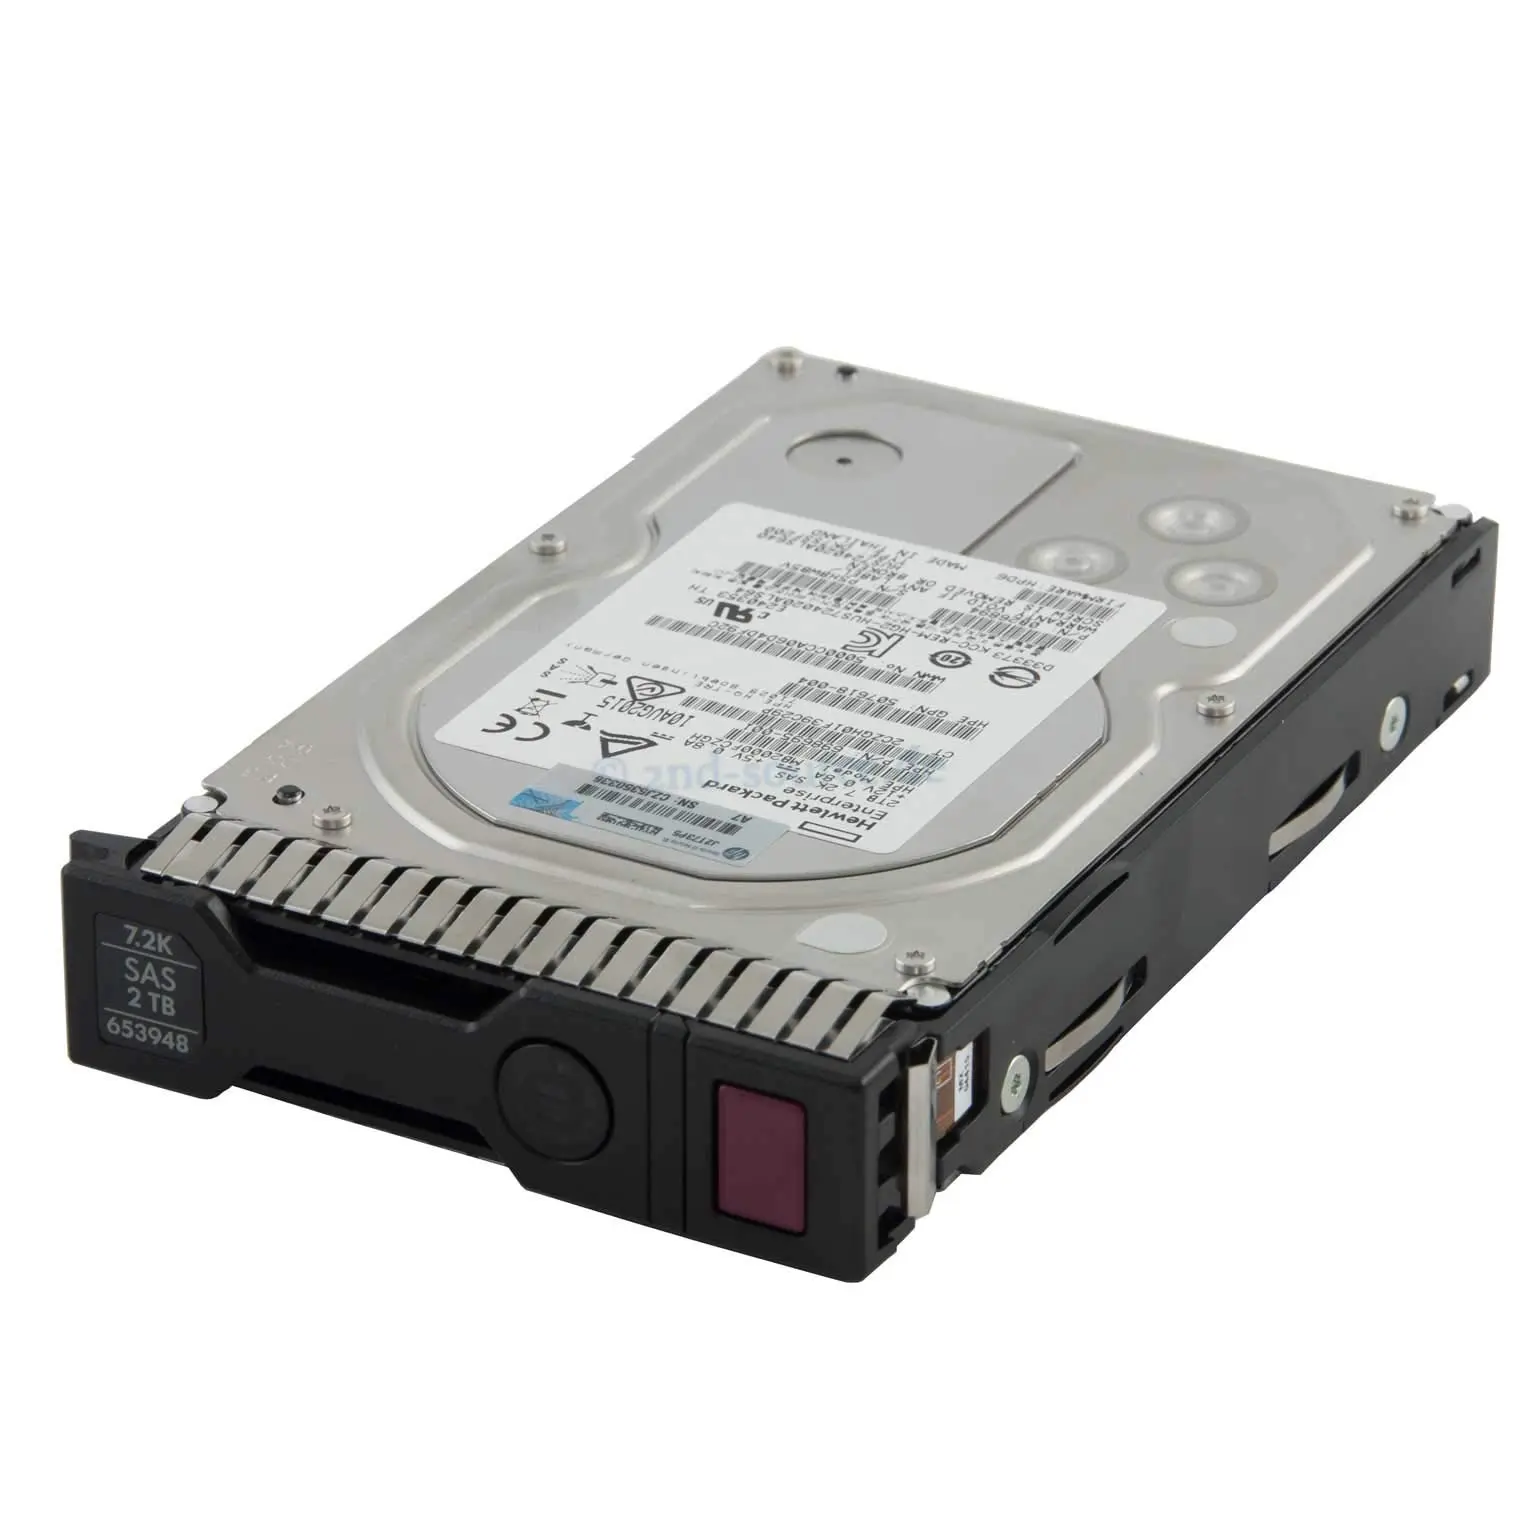 hewlett-packard 2tb ram hard drive - How much RAM is required for 2TB hard disk